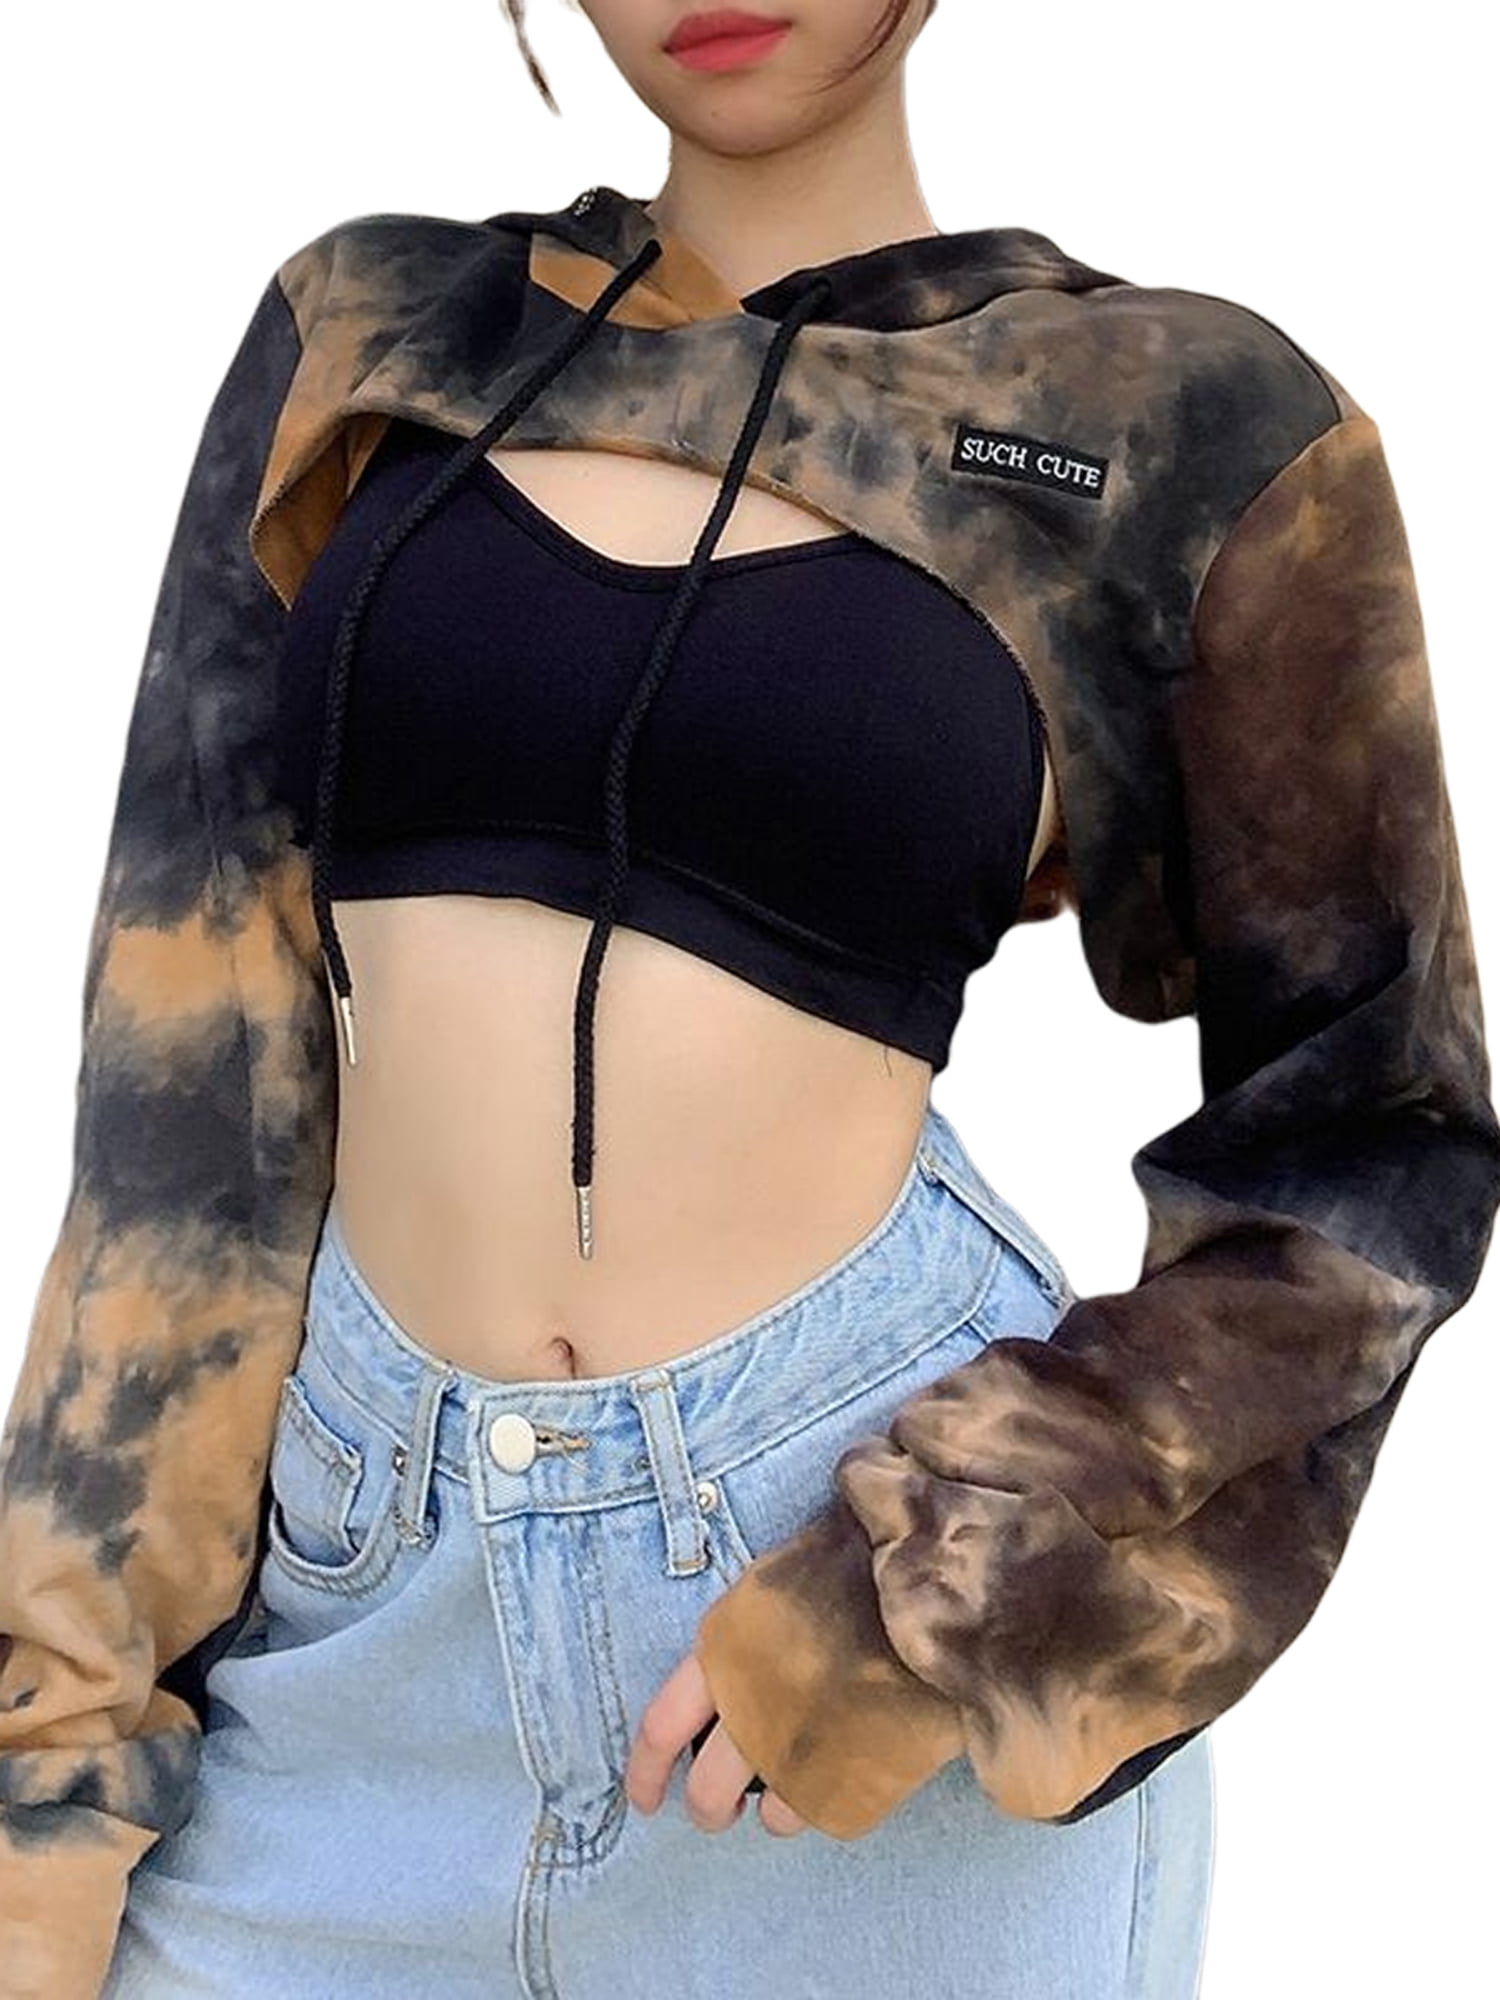 Engood Cropped Hoodies Women Fashion Solid Long Sleeve Pullover Crop Top Sweatshirt with Drawstring 